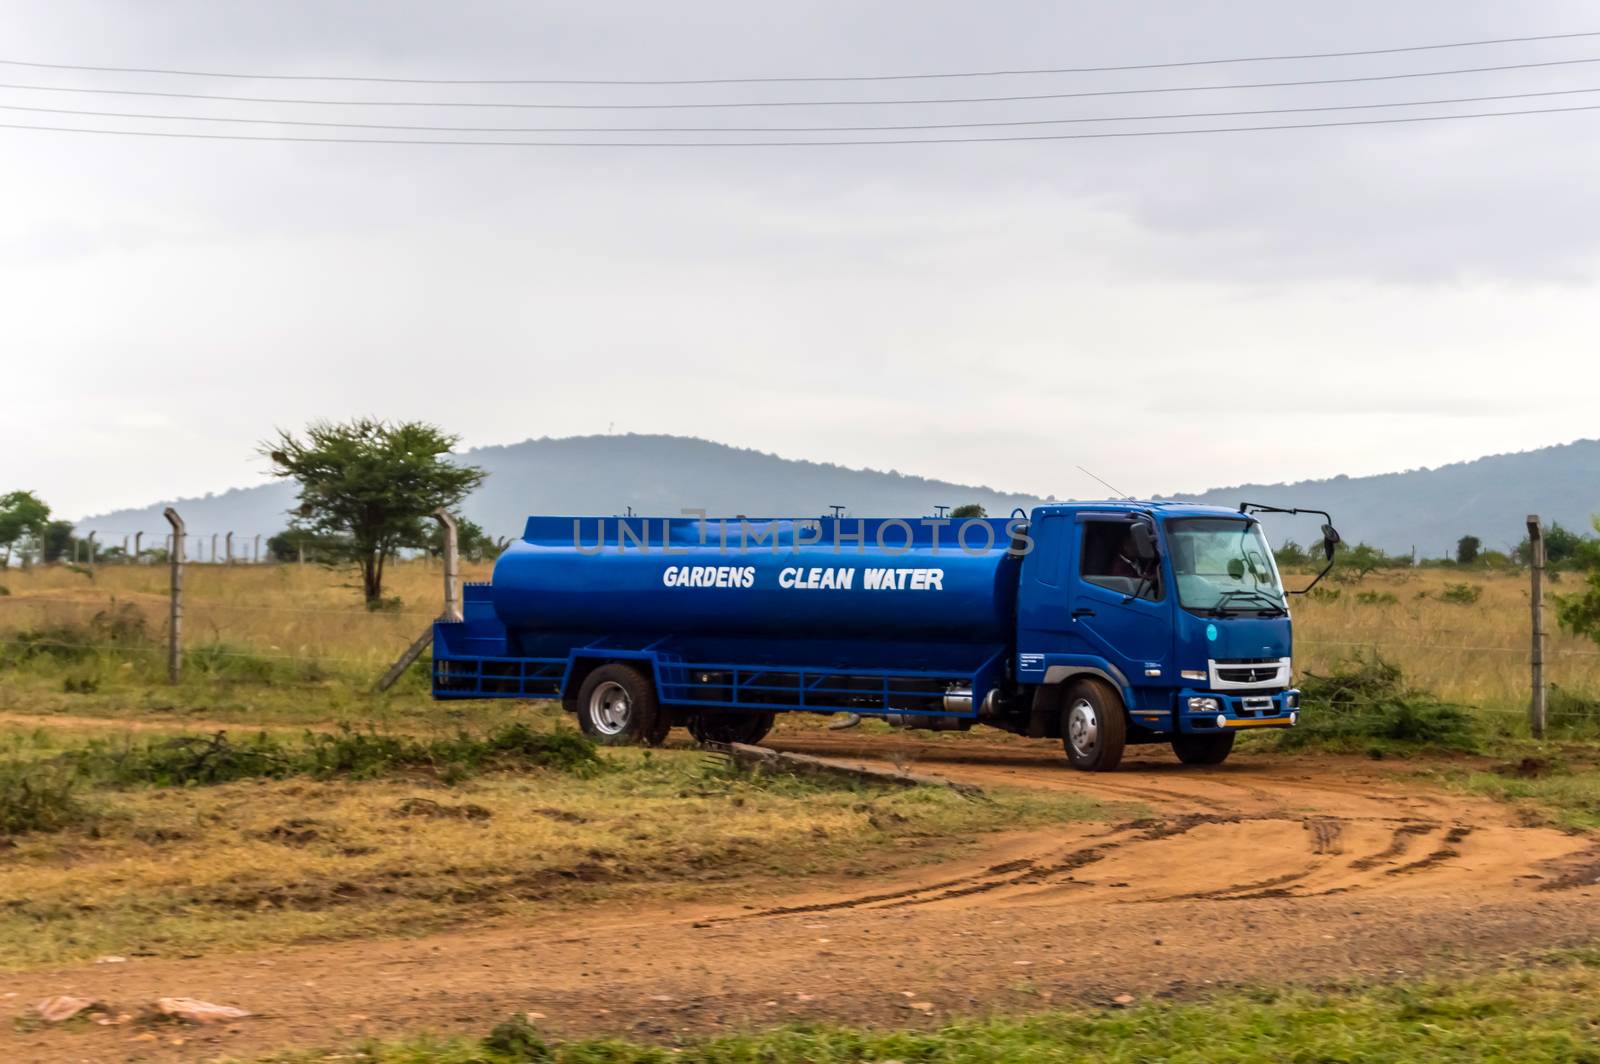 Drinking water delivery truck in the countryside near Nairobi Kenya